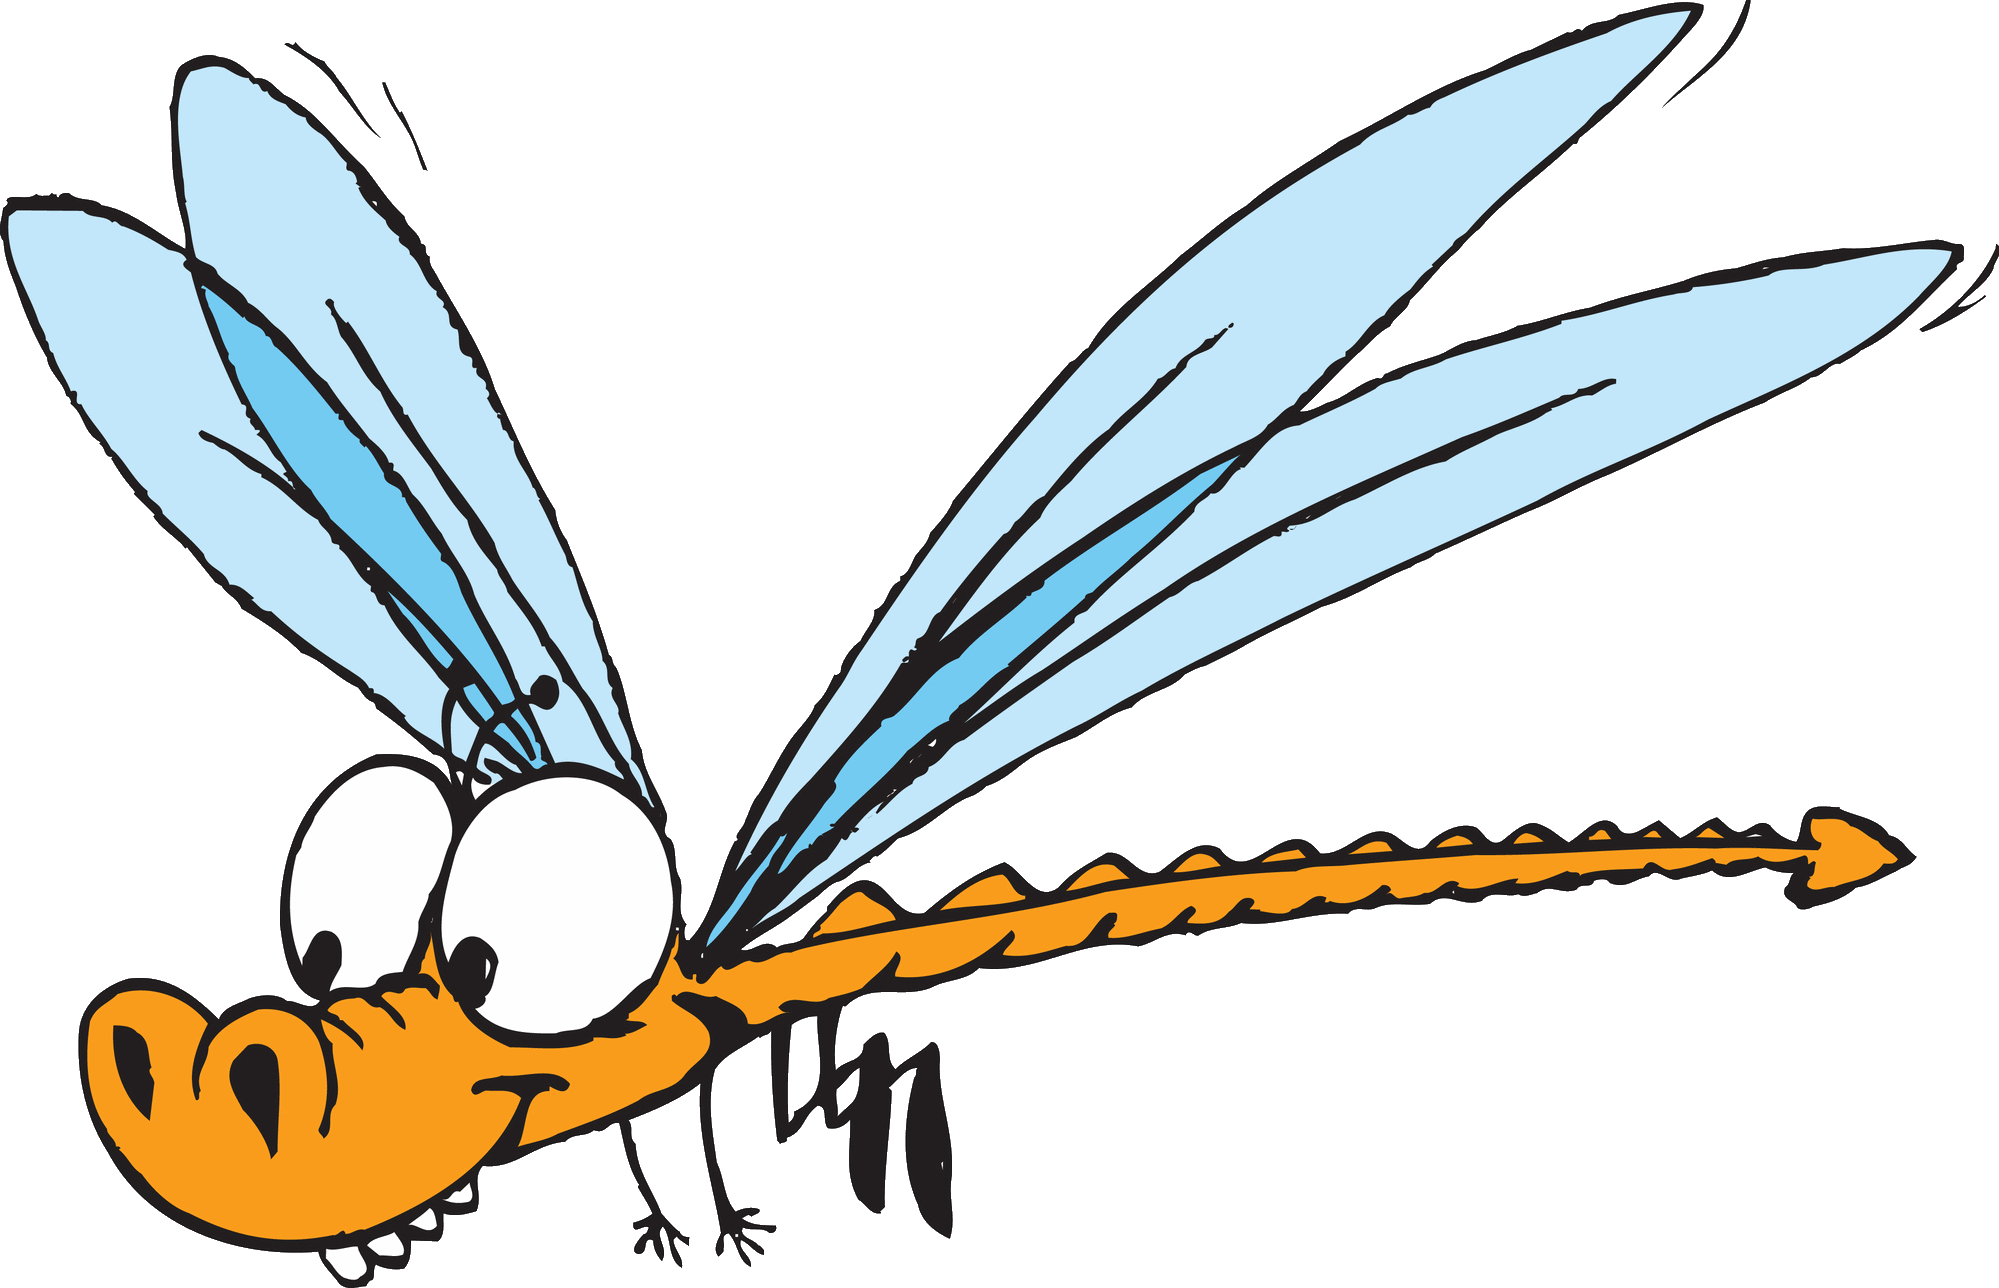 Dragonfly Svg Free Download - 303+ Crafter Files